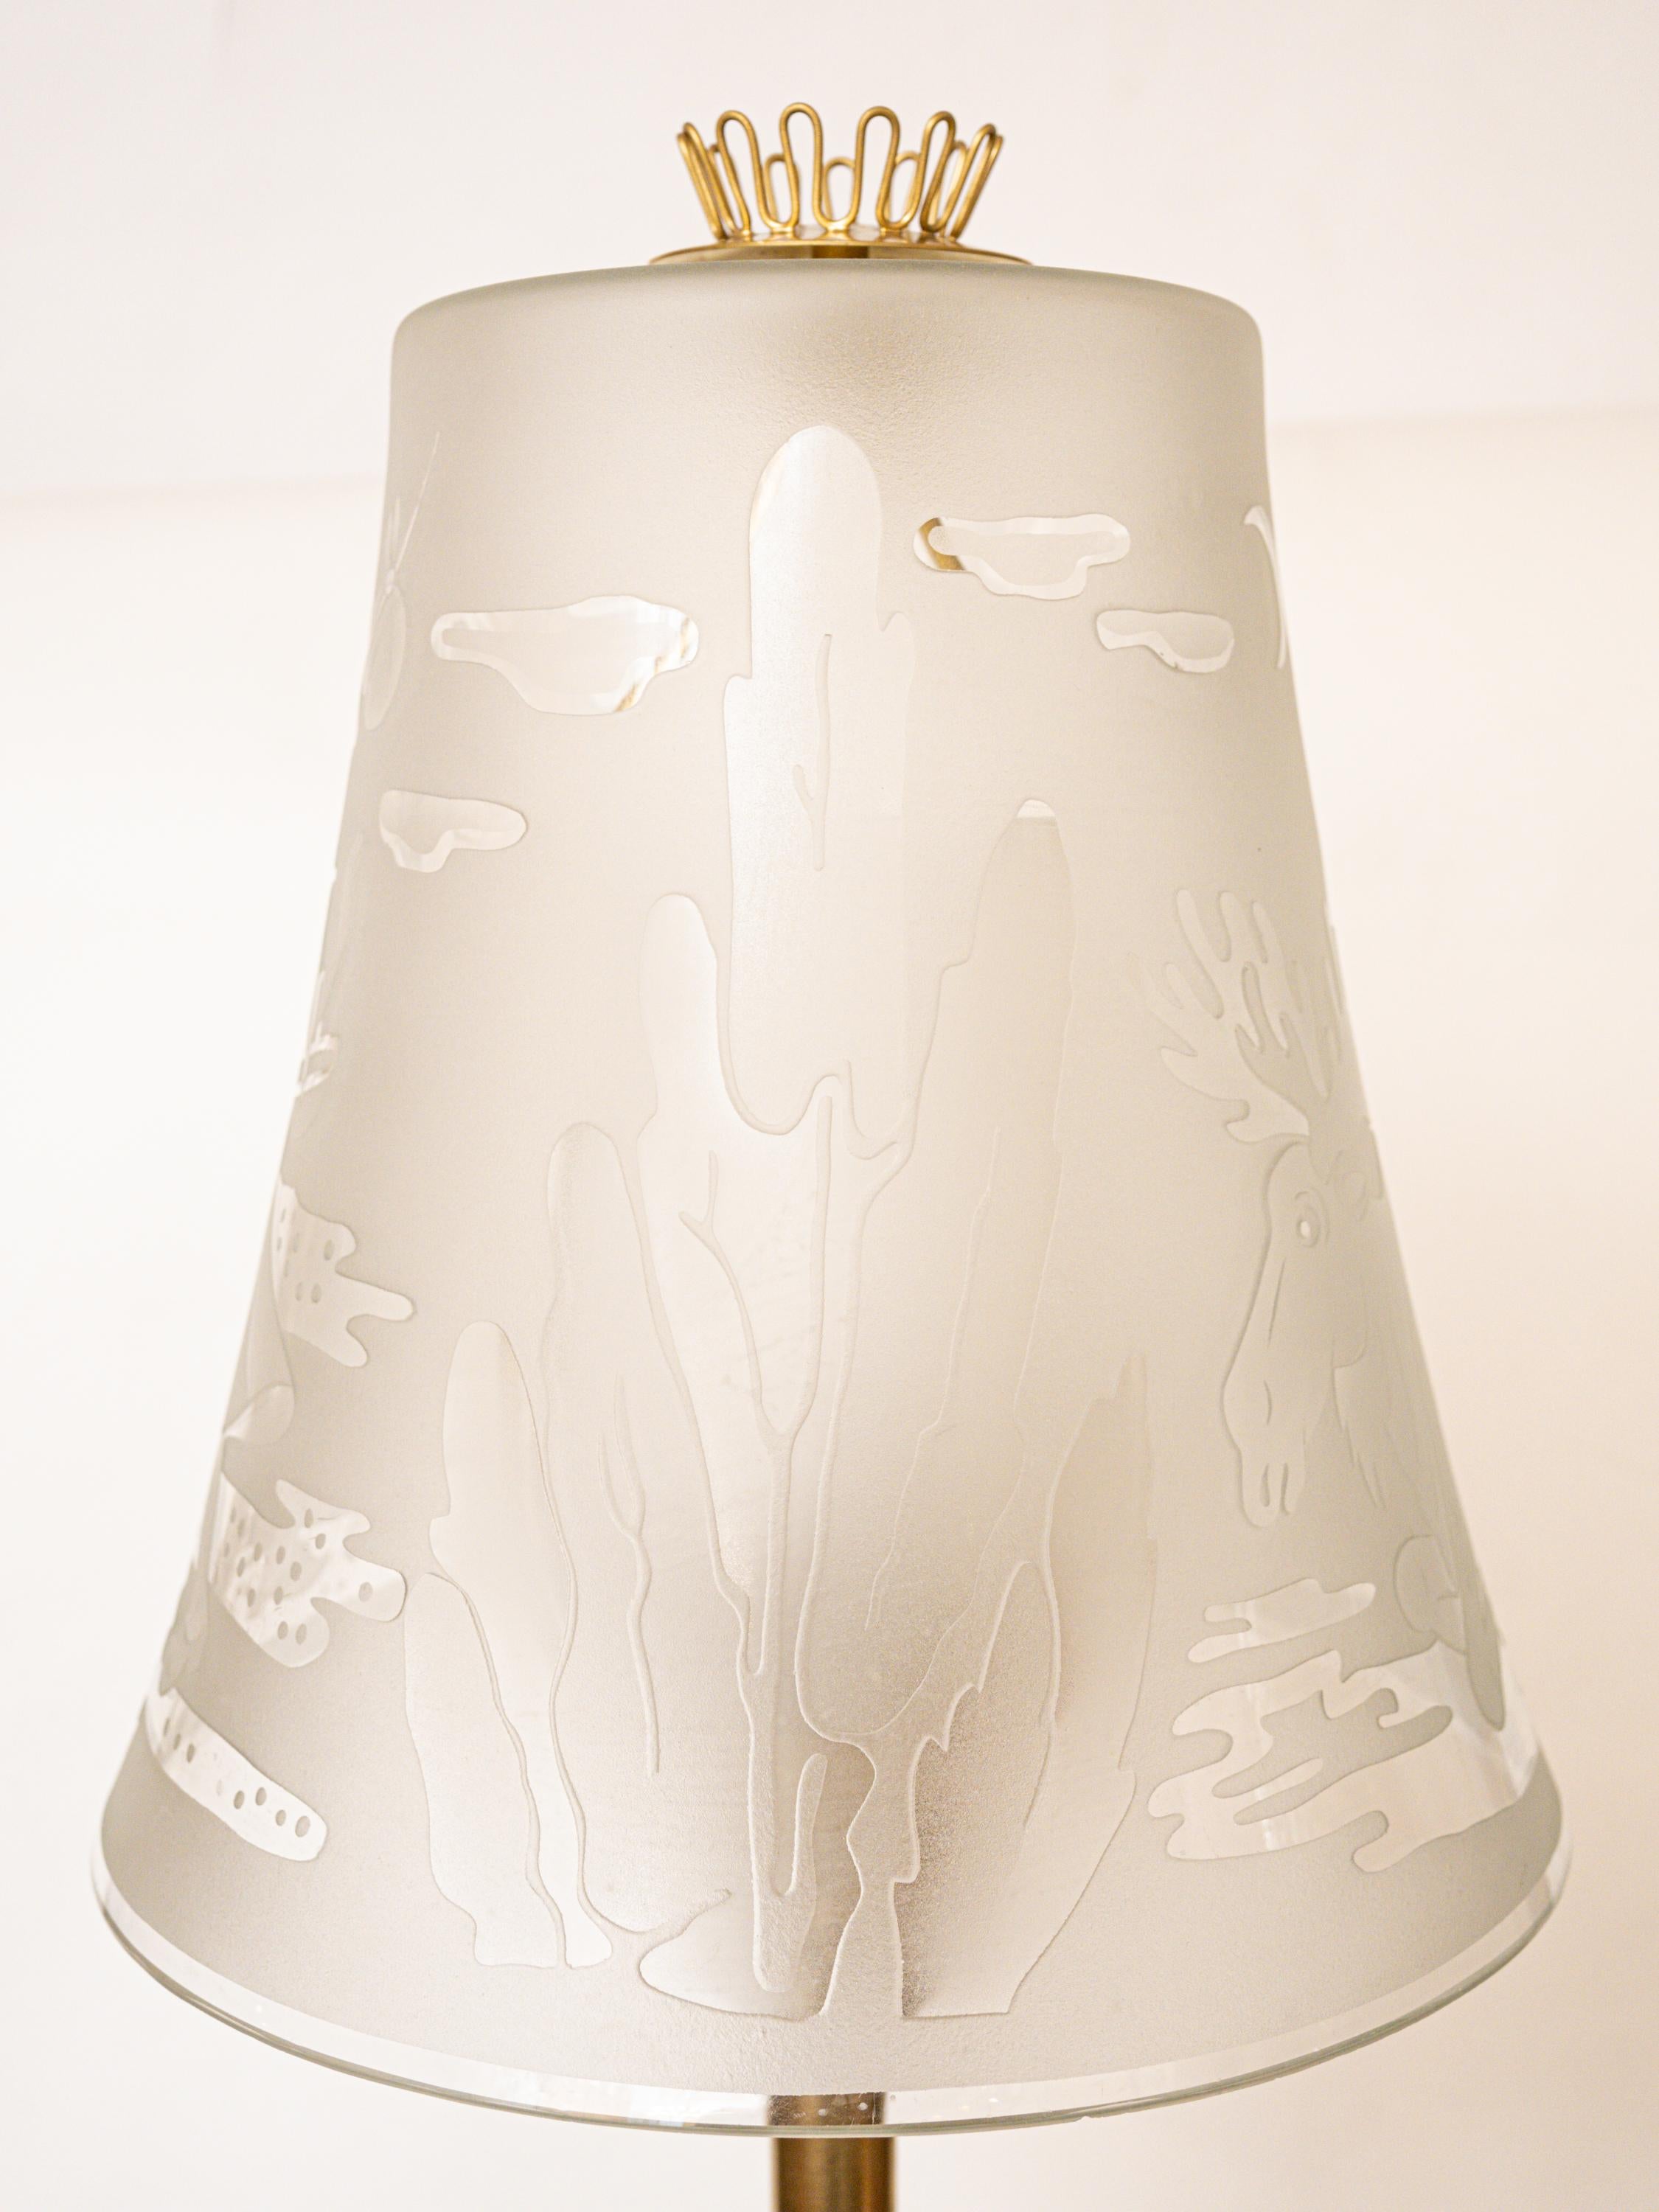 A glass shade lamp by Swedish designer Ulla Skogh, having an intricate designed sandblasted glass shade with depictions of women in folk clothing and forest wildlife. Signed Glossner-Co- U. Sogh. Circa 1940s.

Overall Height: 68.5